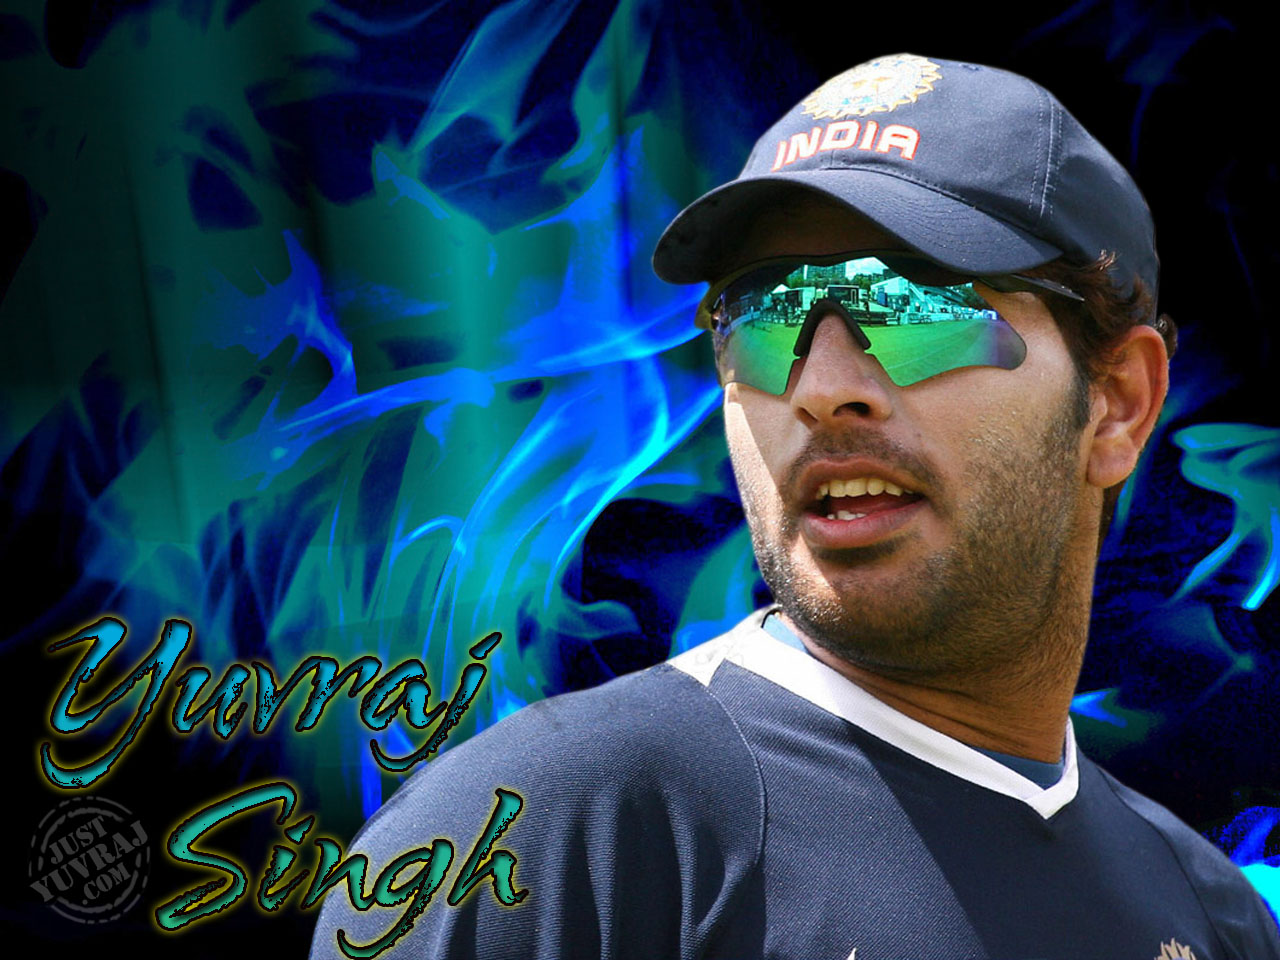 yuvraj singh is like glorious and very handsome cricketer of the world